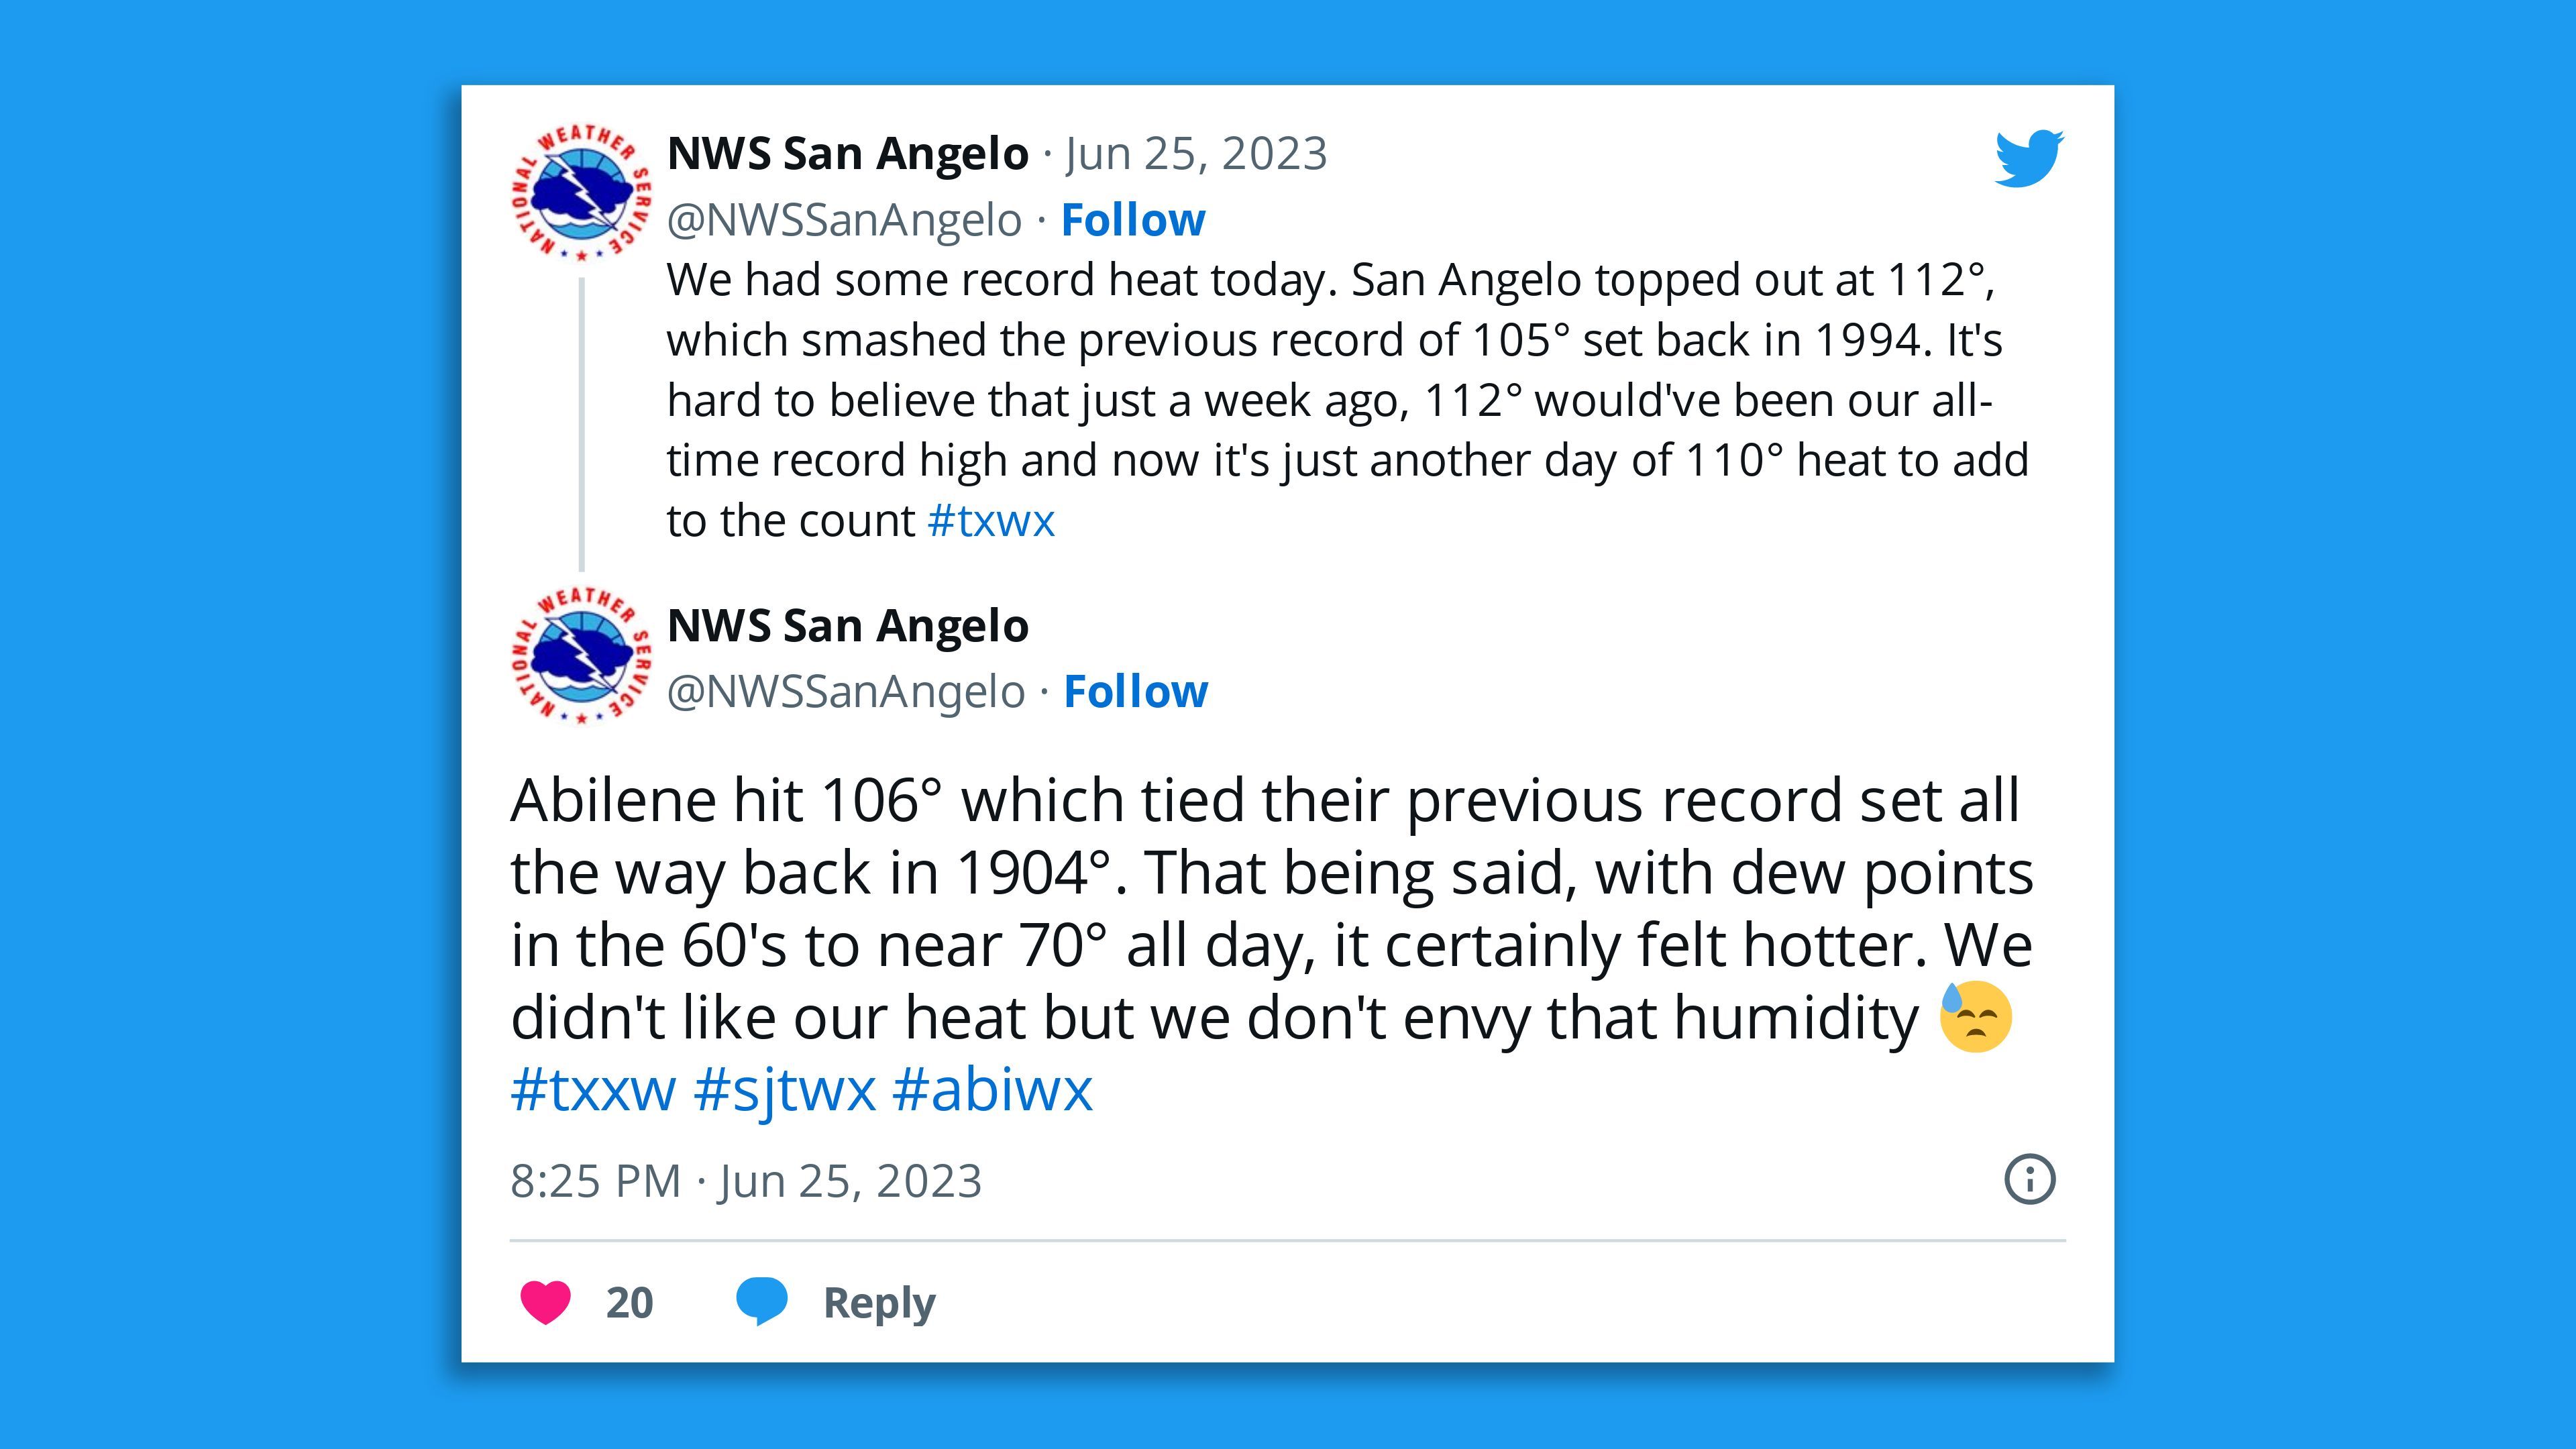 A screenshot of an NWS tweet saying: "We had some record heat today. San Angelo topped out at 112°, which smashed the previous record of 105° set back in 1994. It's hard to believe that just a week ago, 112° would've been our all-time record high and now it's just another day of 110° heat to add to the count #txwx NWS San Angelo @NWSSanAngelo · 3h Replying to  @NWSSanAngelo Abilene hit 106° which tied their previous record set all the way back in 1904°. That being said, with dew points in the 60's to near 70° all day, it certainly felt hotter. We didn't like our heat but we don't envy that humidity."